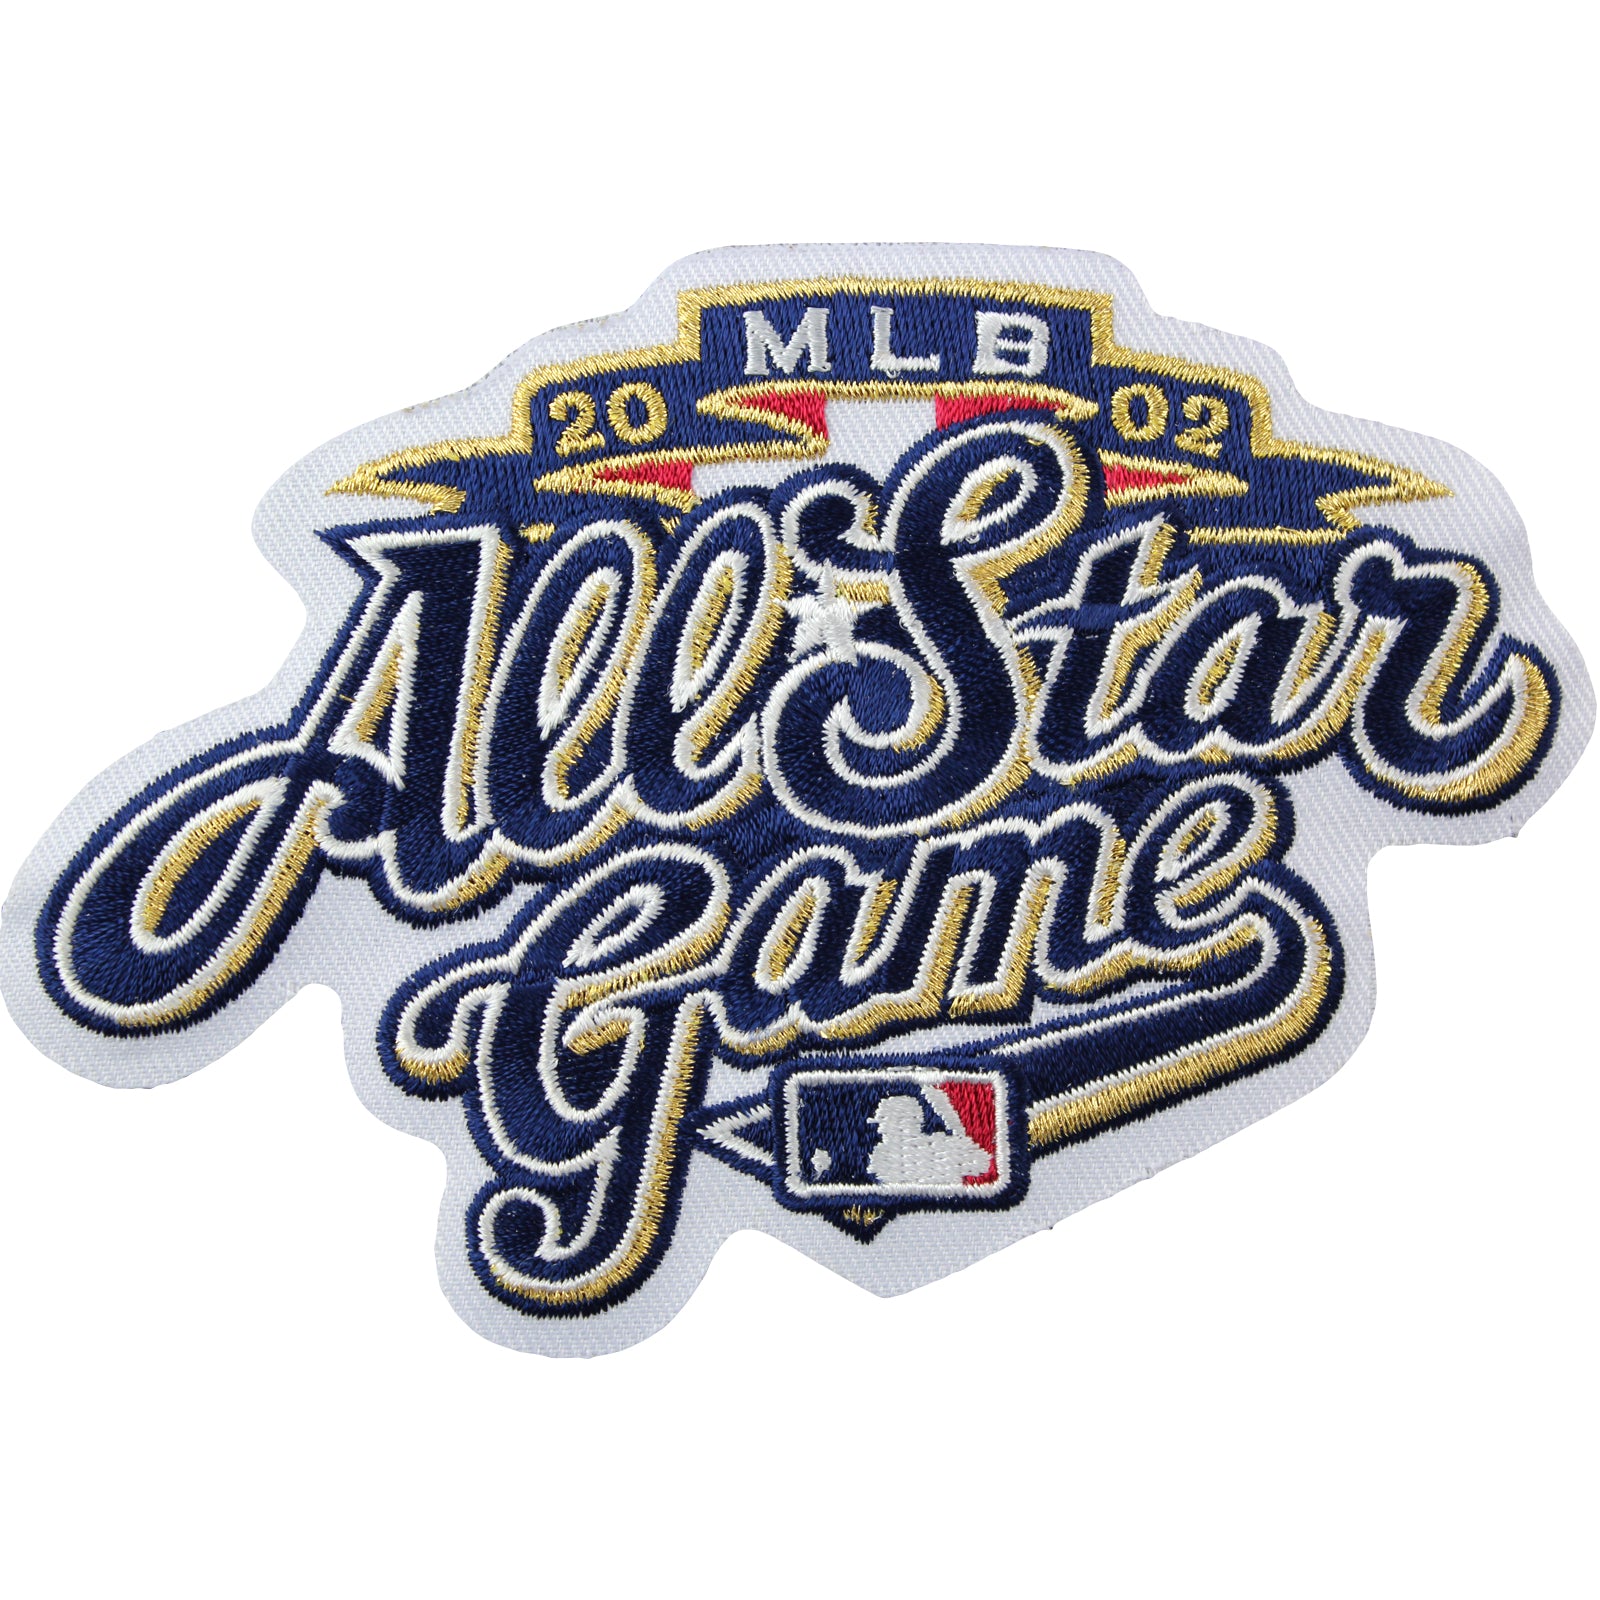 NHL All Star Game 2002 Vector Logo - Download Free SVG Icon